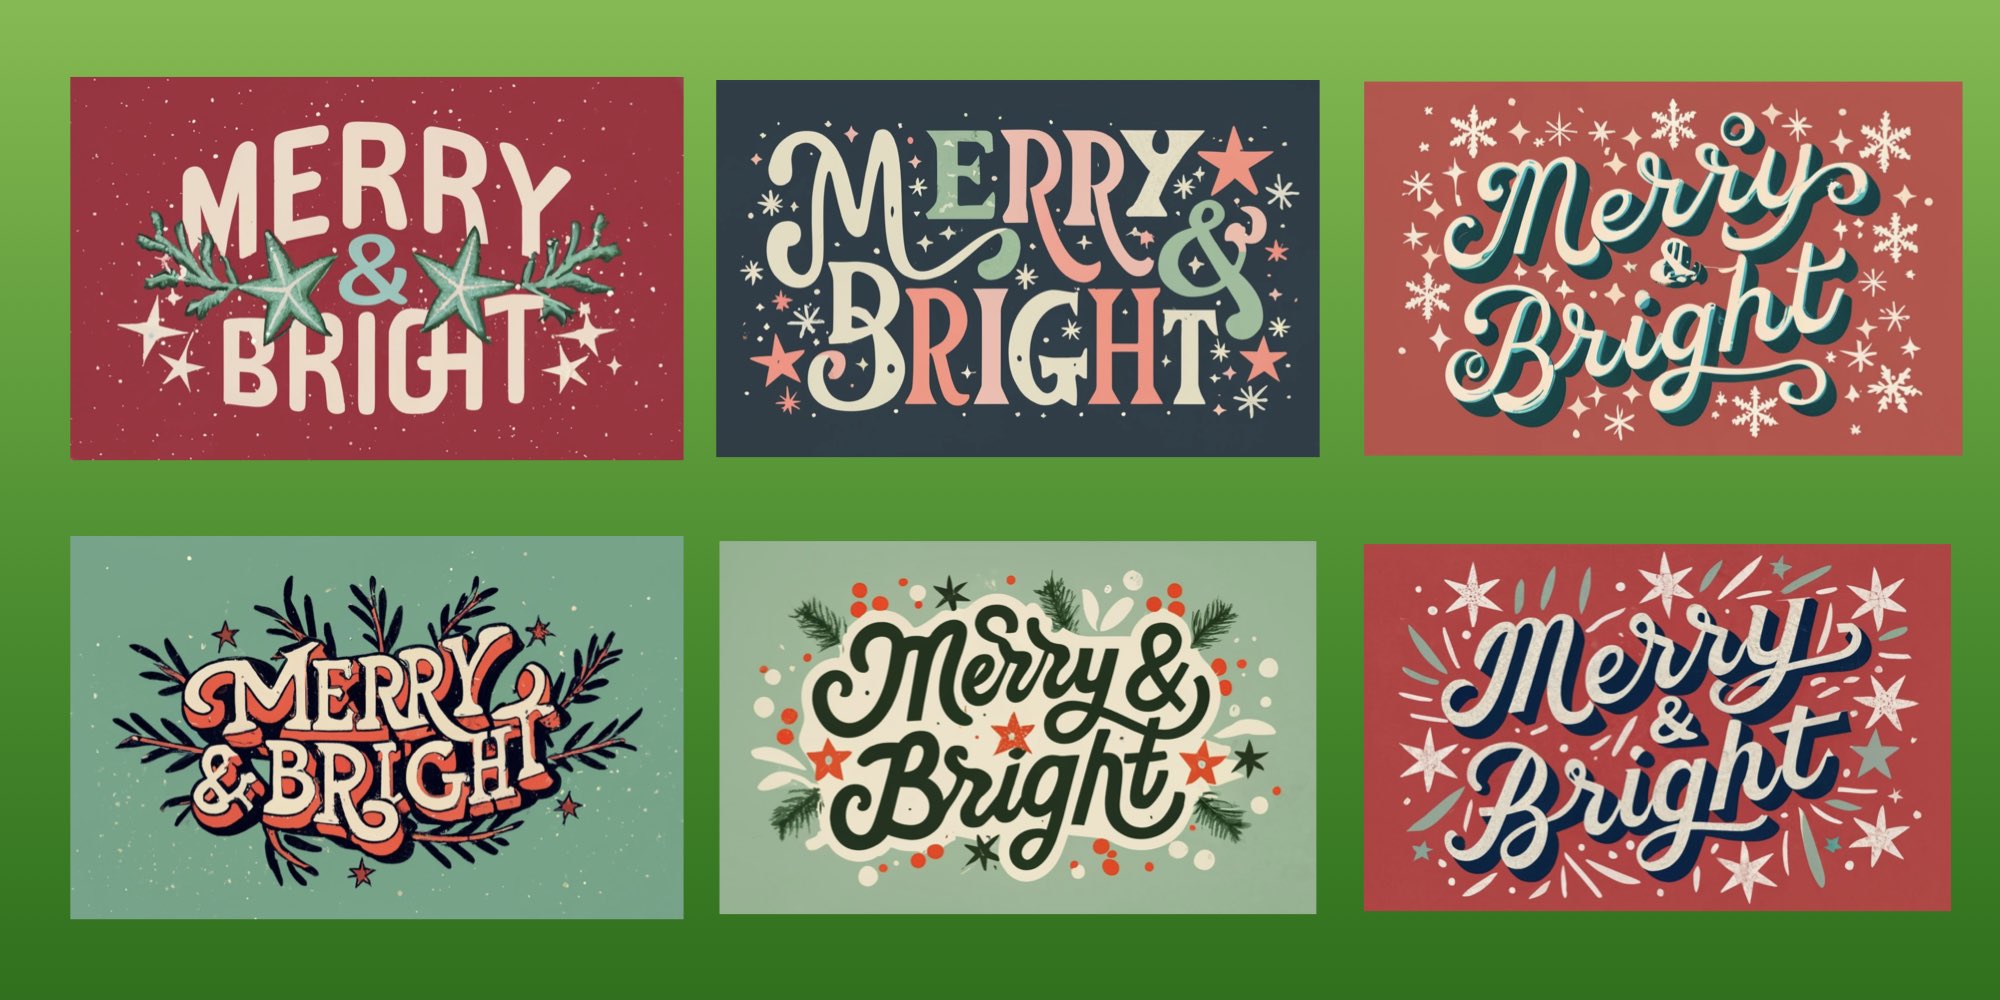 colorful logos with the words "Merry and Bright"